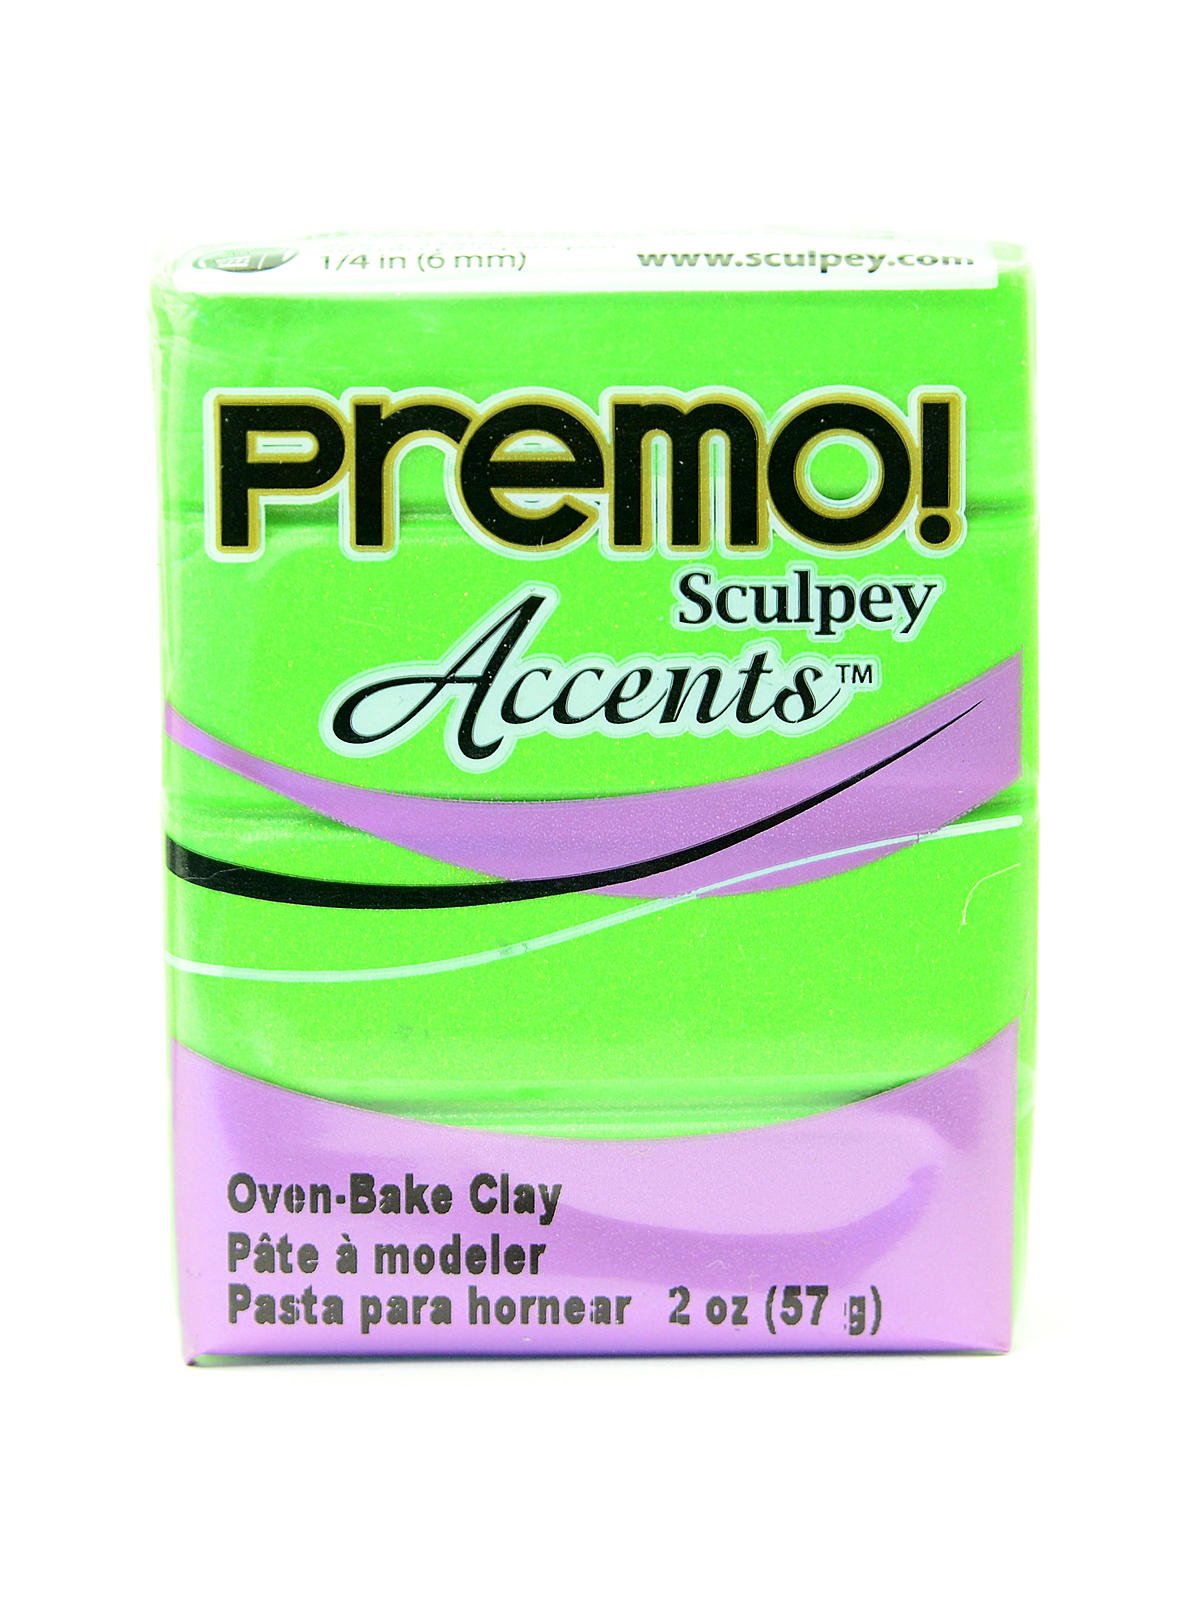 Sculpey Premo Polymer Oven-Baked Clay 2oz Bright Green Pearl 5035